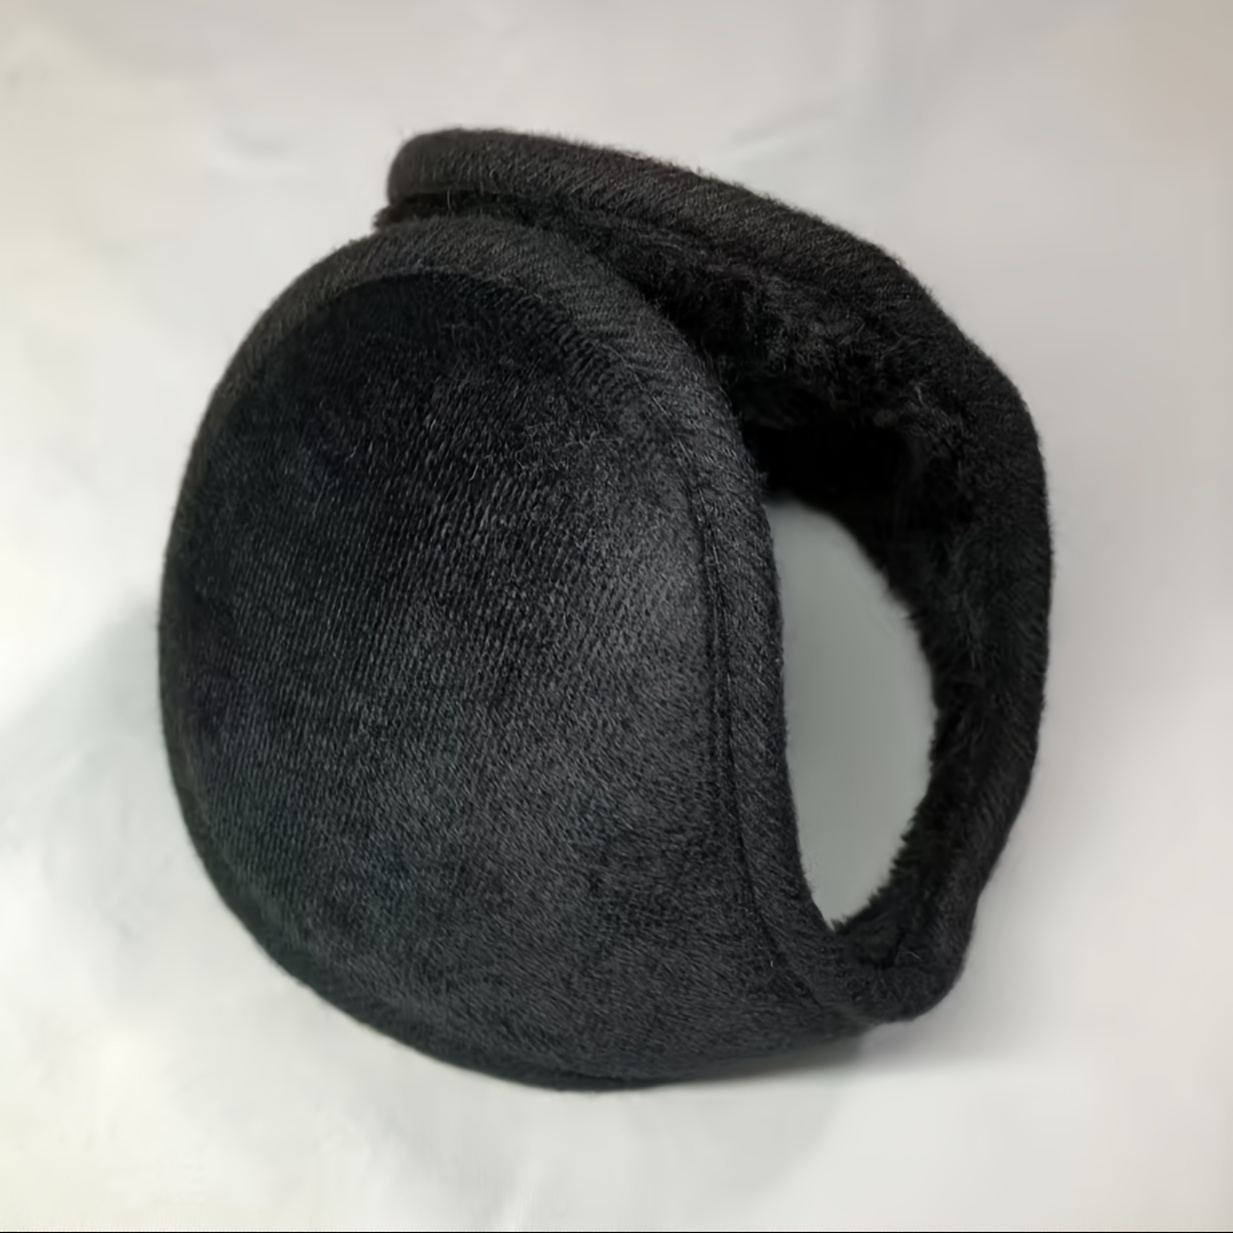 Winter Fluffy Earmuffs, For Outdoor Riding Skiing Stay Warm